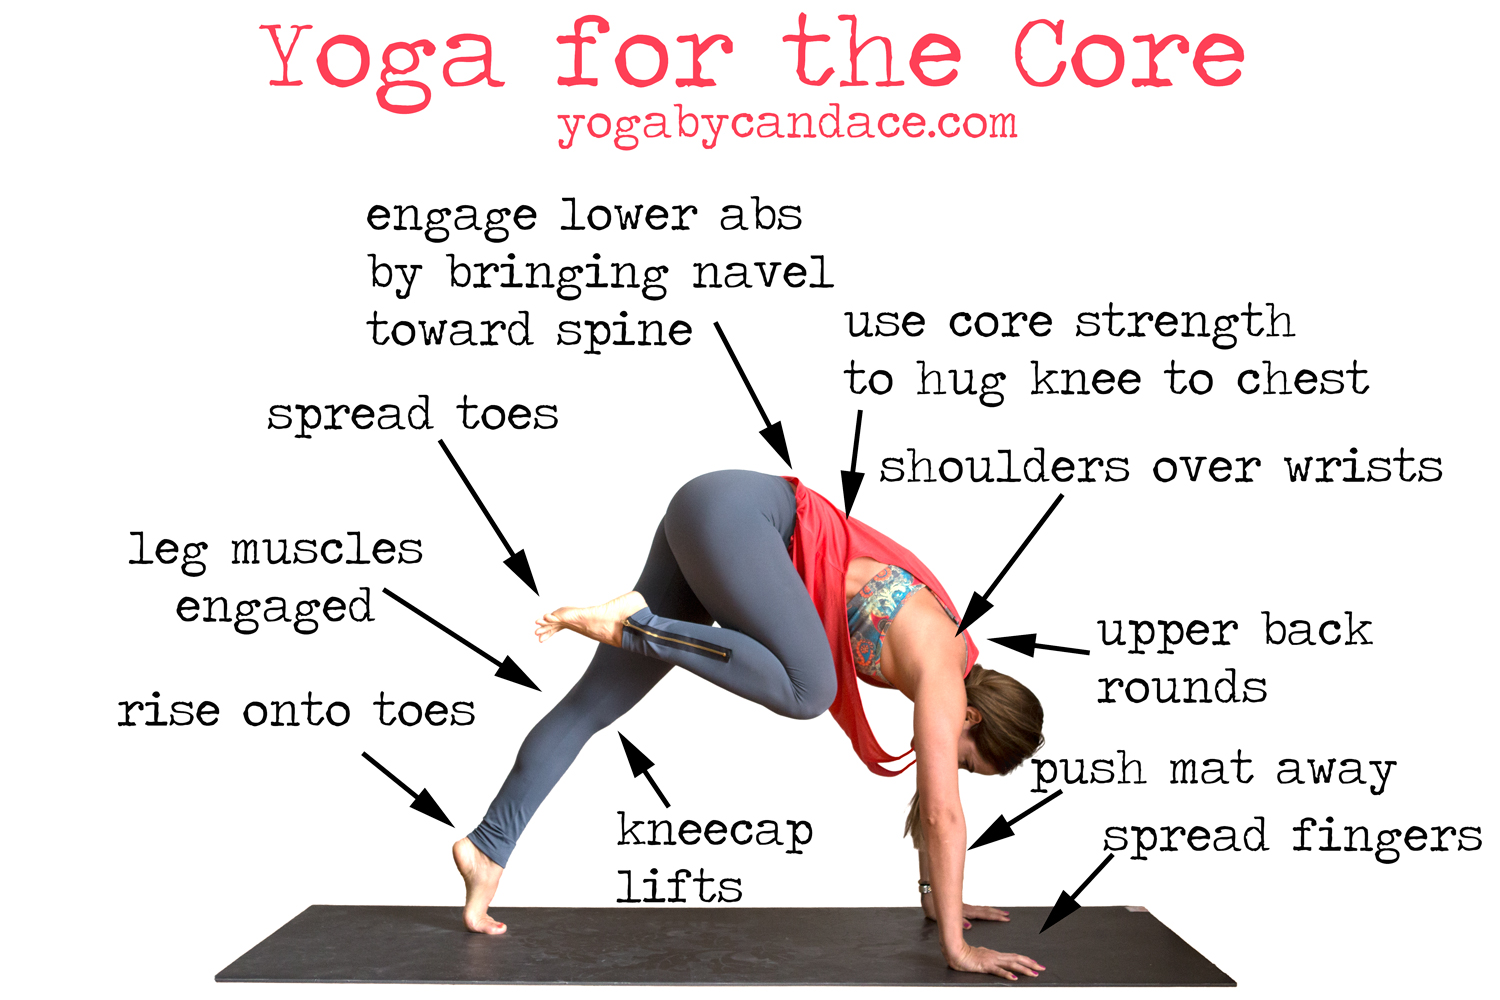 15 Yoga Poses for a Strong and Flexible Spine - YOGA PRACTICE